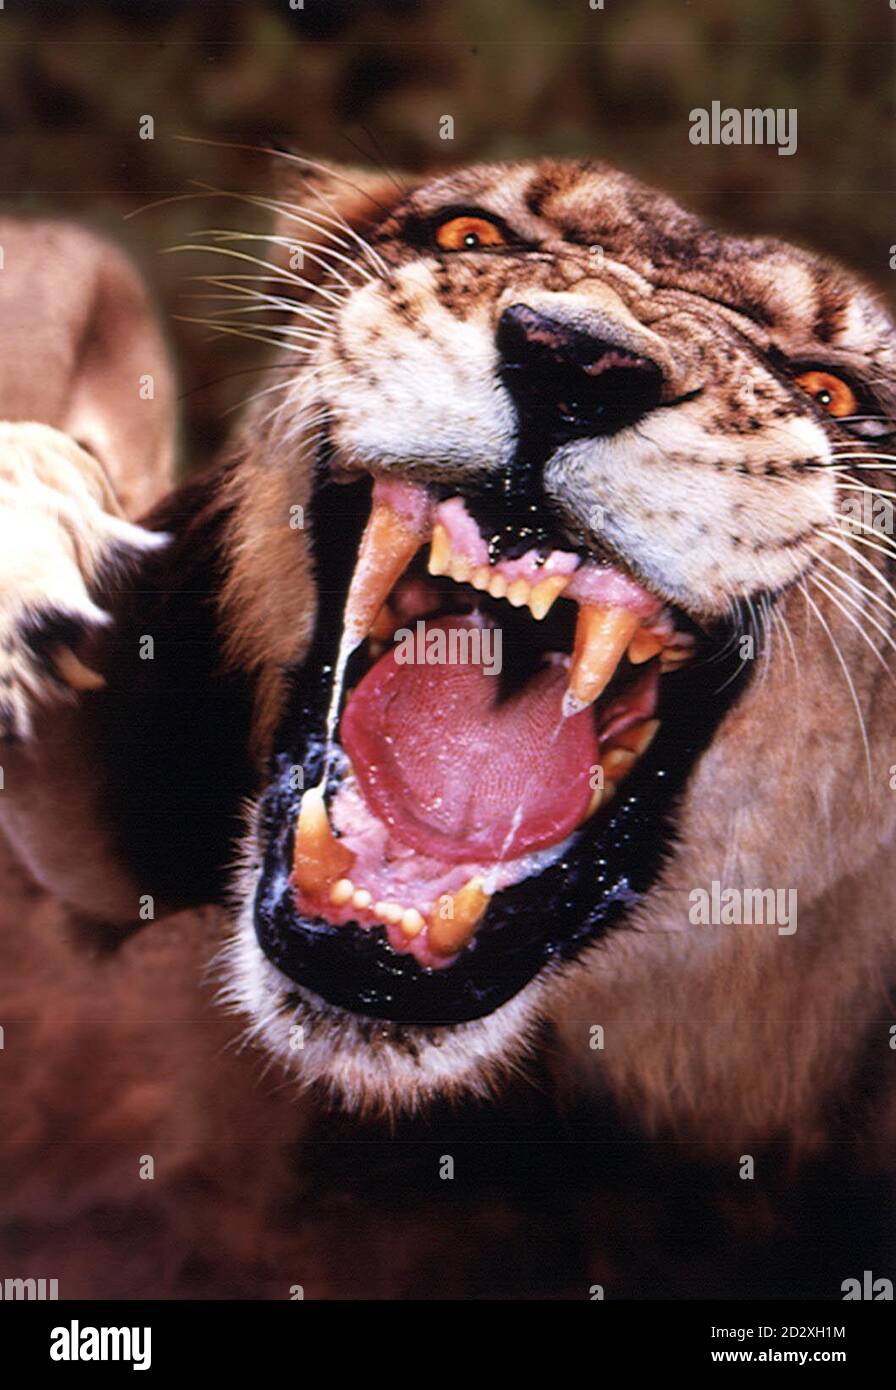 ** EMBARGOED UNTIL 22:30 JANUARY 30 1997** London photographer Steve Bloom has won the first ever  Power of Photography Award 1997 for this photo of a lioness at the Kapama Game Reserve in South Africa.  'I was on the outside of the reserve fence with my lens held right up close to it', explains Steve. The lioness clearly resented my presensce and charged towards me - I found traces of saliva on the lens afterwards.  Bloom grew up in Cape Town but has spent much of his working life in England producing special effects images for advertising agencies. He receives his award, which is run by Amat Stock Photo